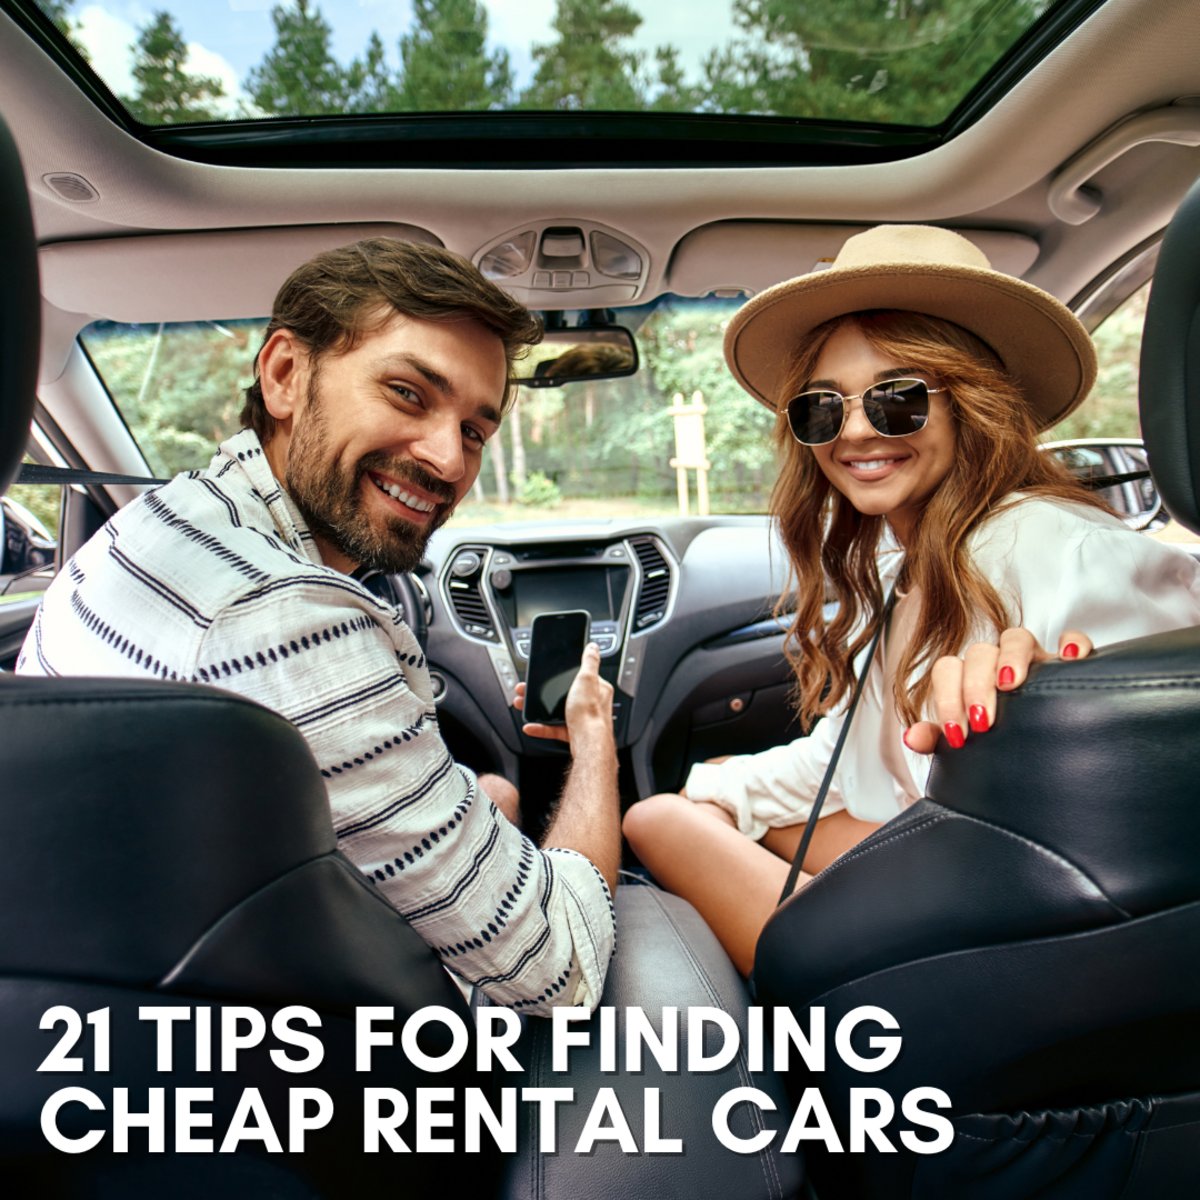 Planning on hitting the open road on your way to Dover? 🚗 Read these 21 tips for scoring sweet deals on #rentalcars so that you can explore without breaking the bank. bit.ly/3uBCqBJ #roadtrip #savvytraveler